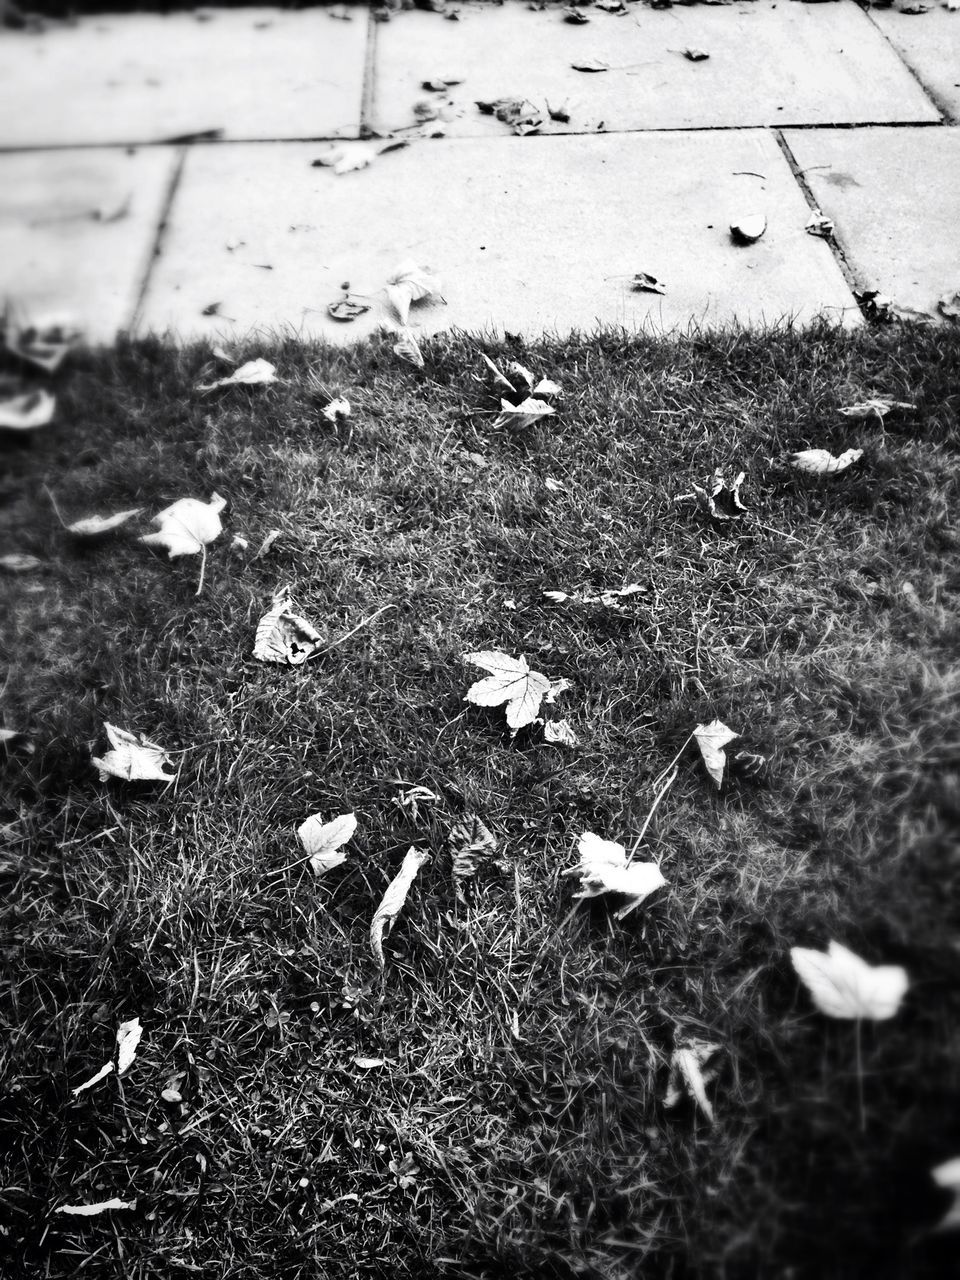 autumn, leaf, dry, high angle view, fallen, season, change, grass, leaves, asphalt, street, ground, nature, day, falling, field, outdoors, surface level, close-up, no people